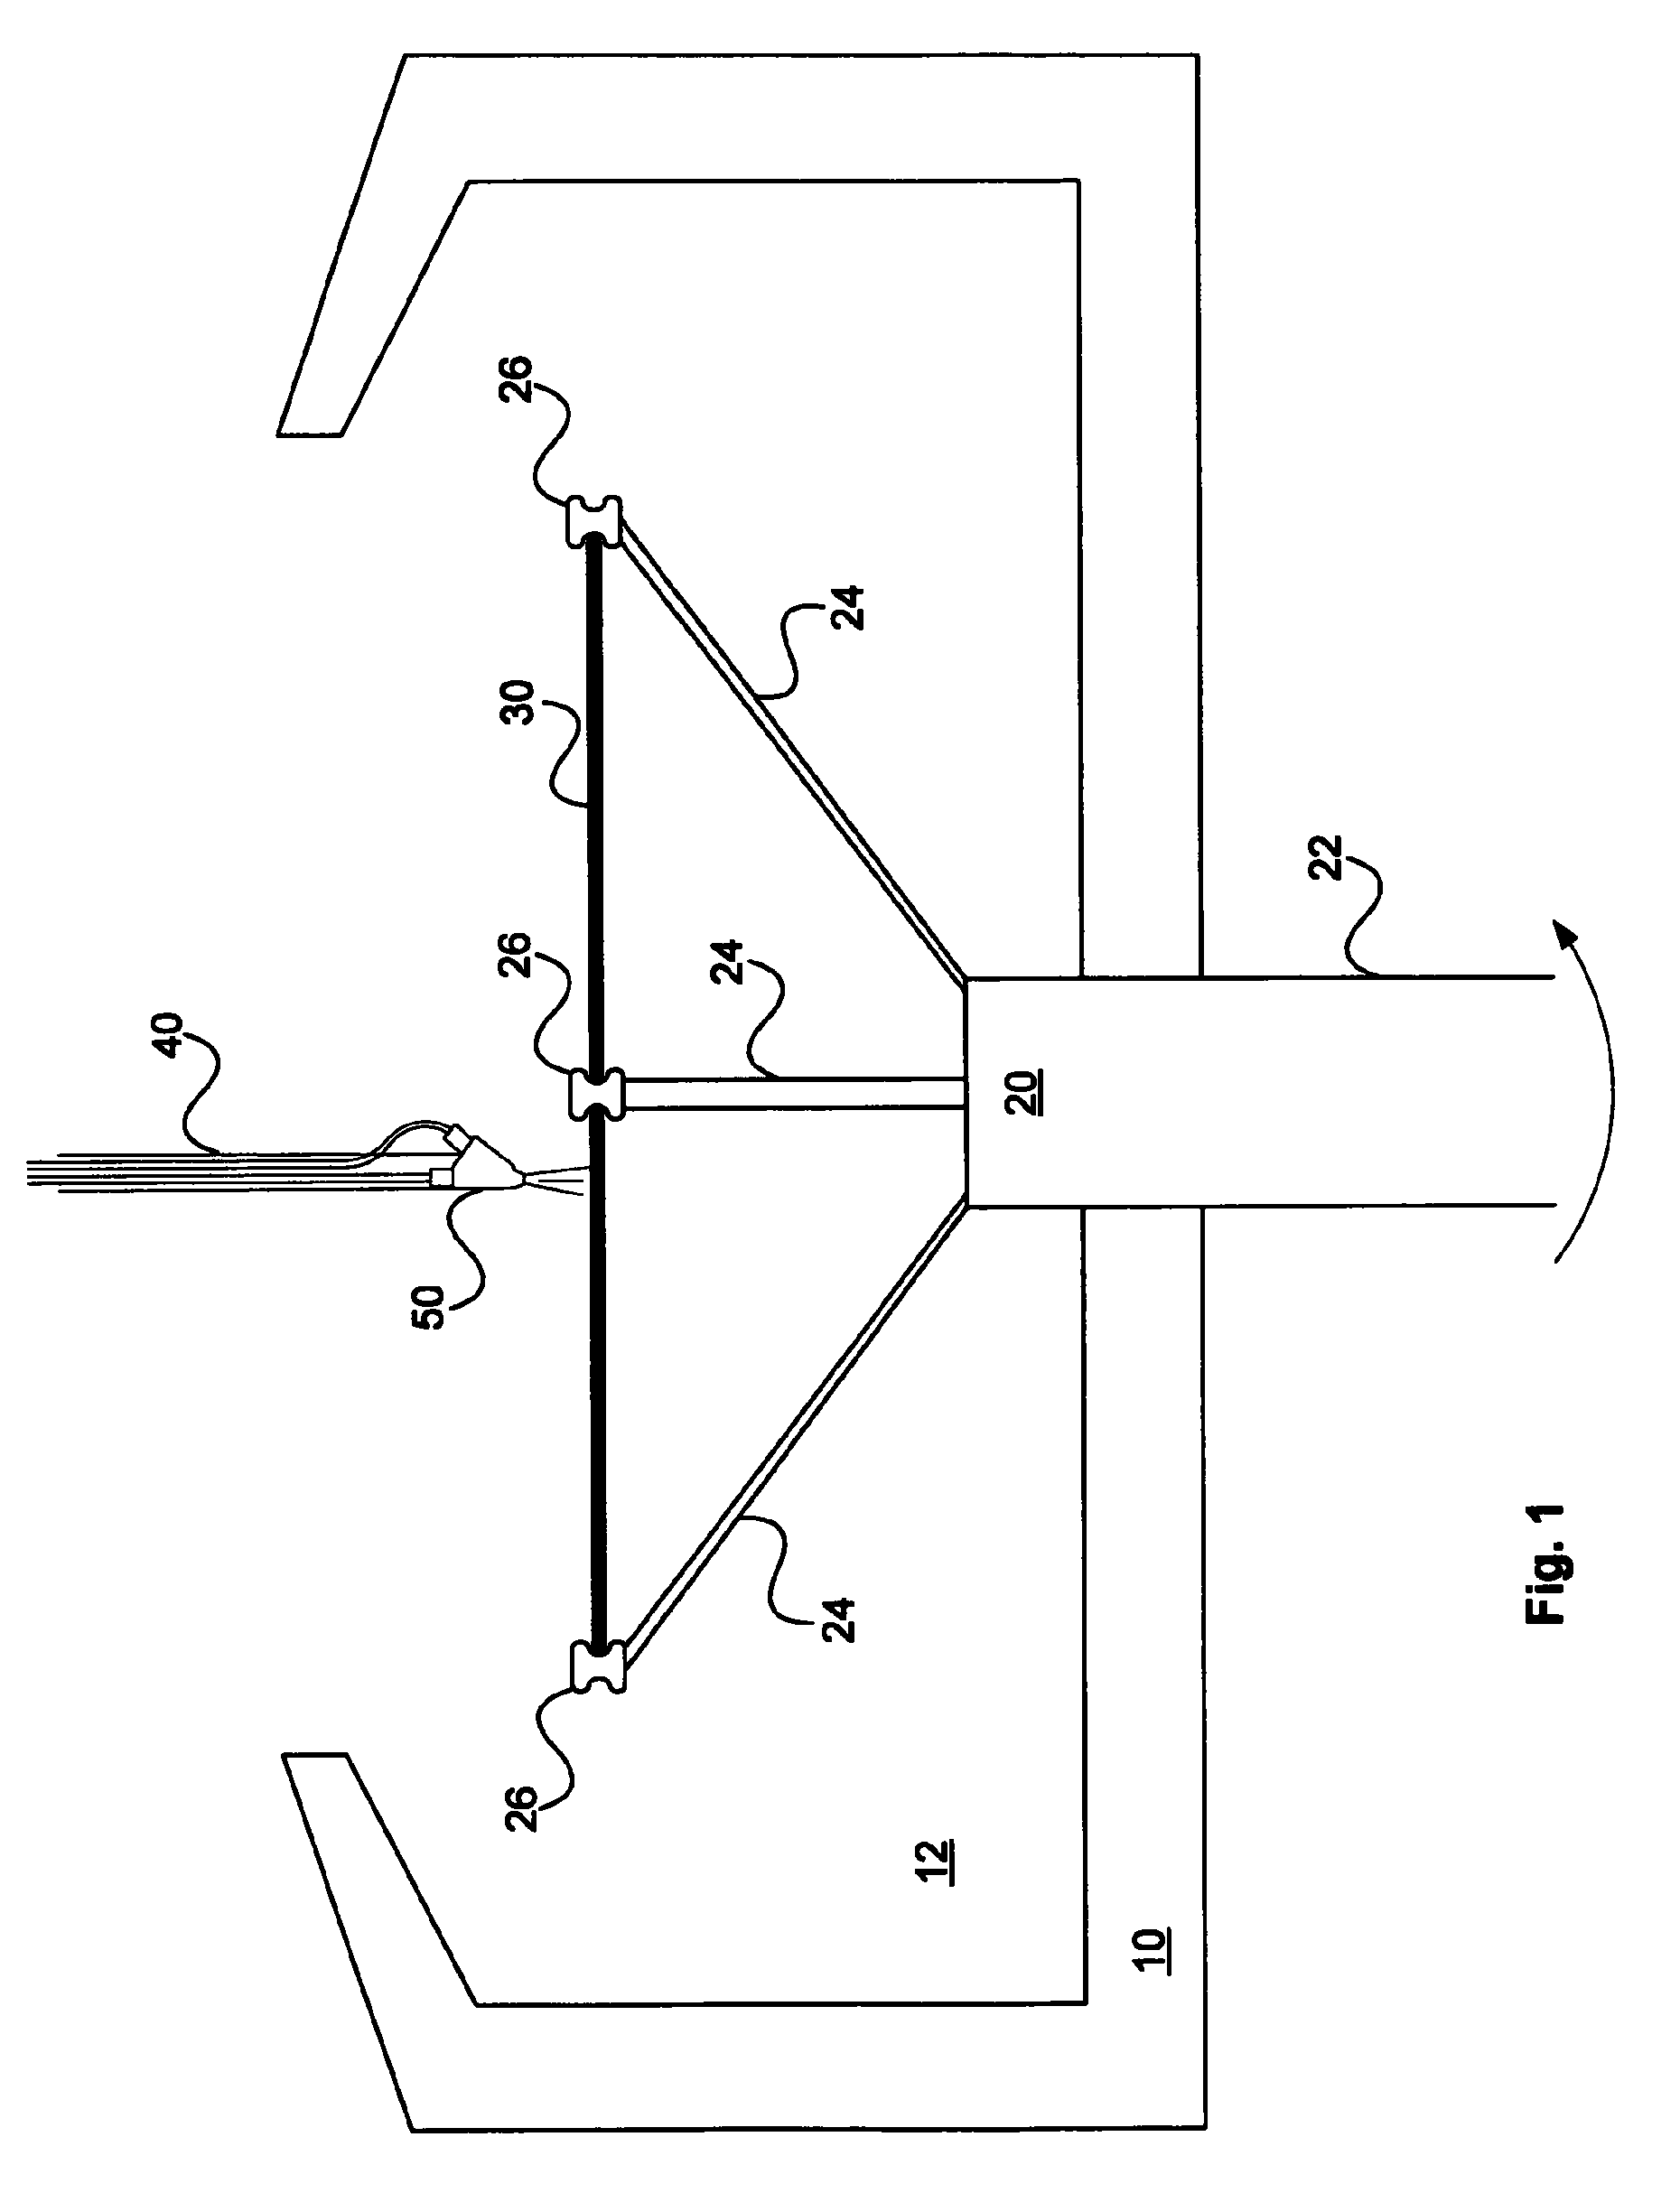 Method of particle contaminant removal